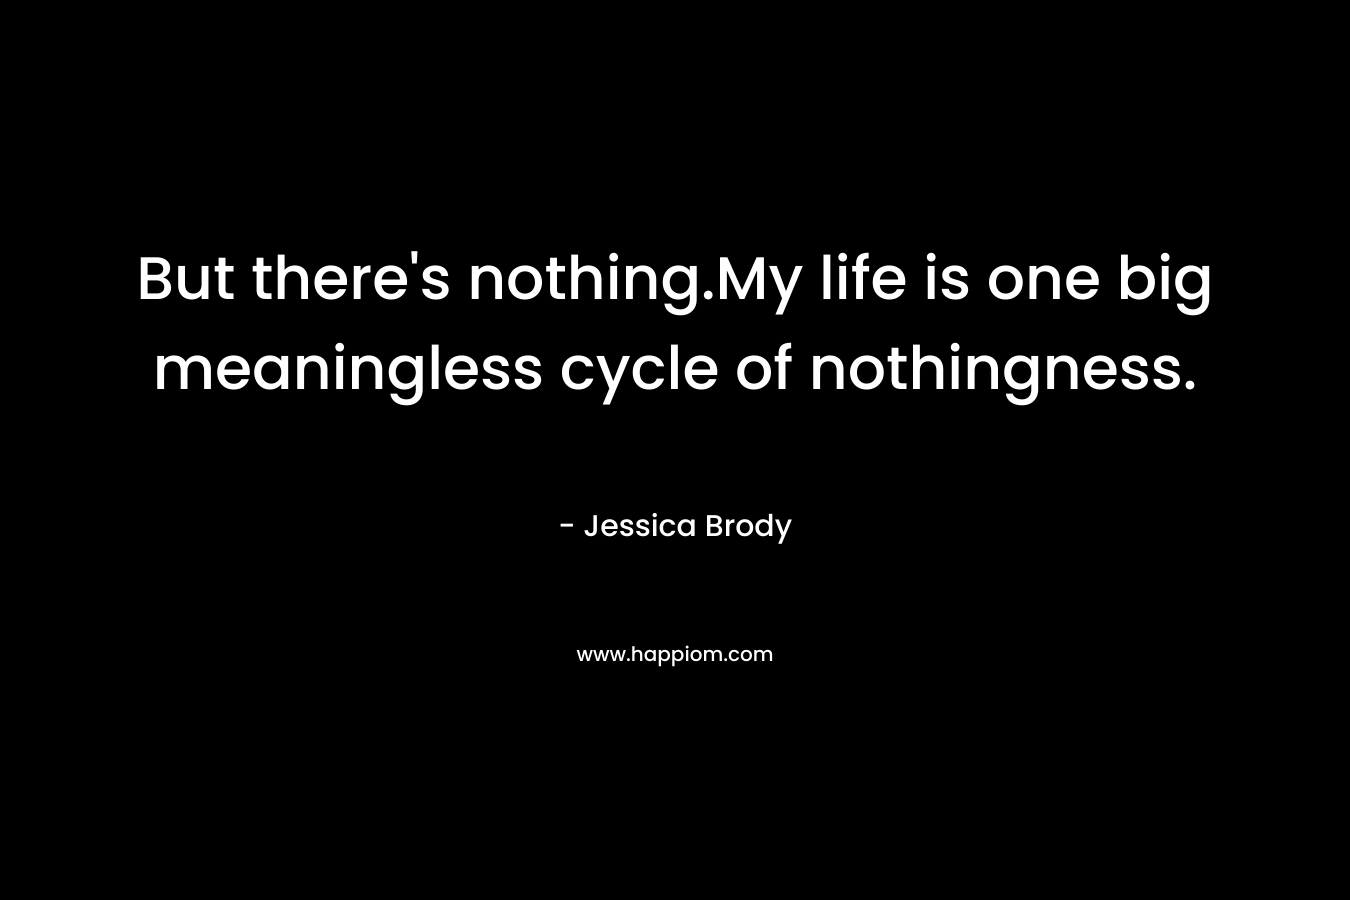 But there’s nothing.My life is one big meaningless cycle of nothingness. – Jessica Brody